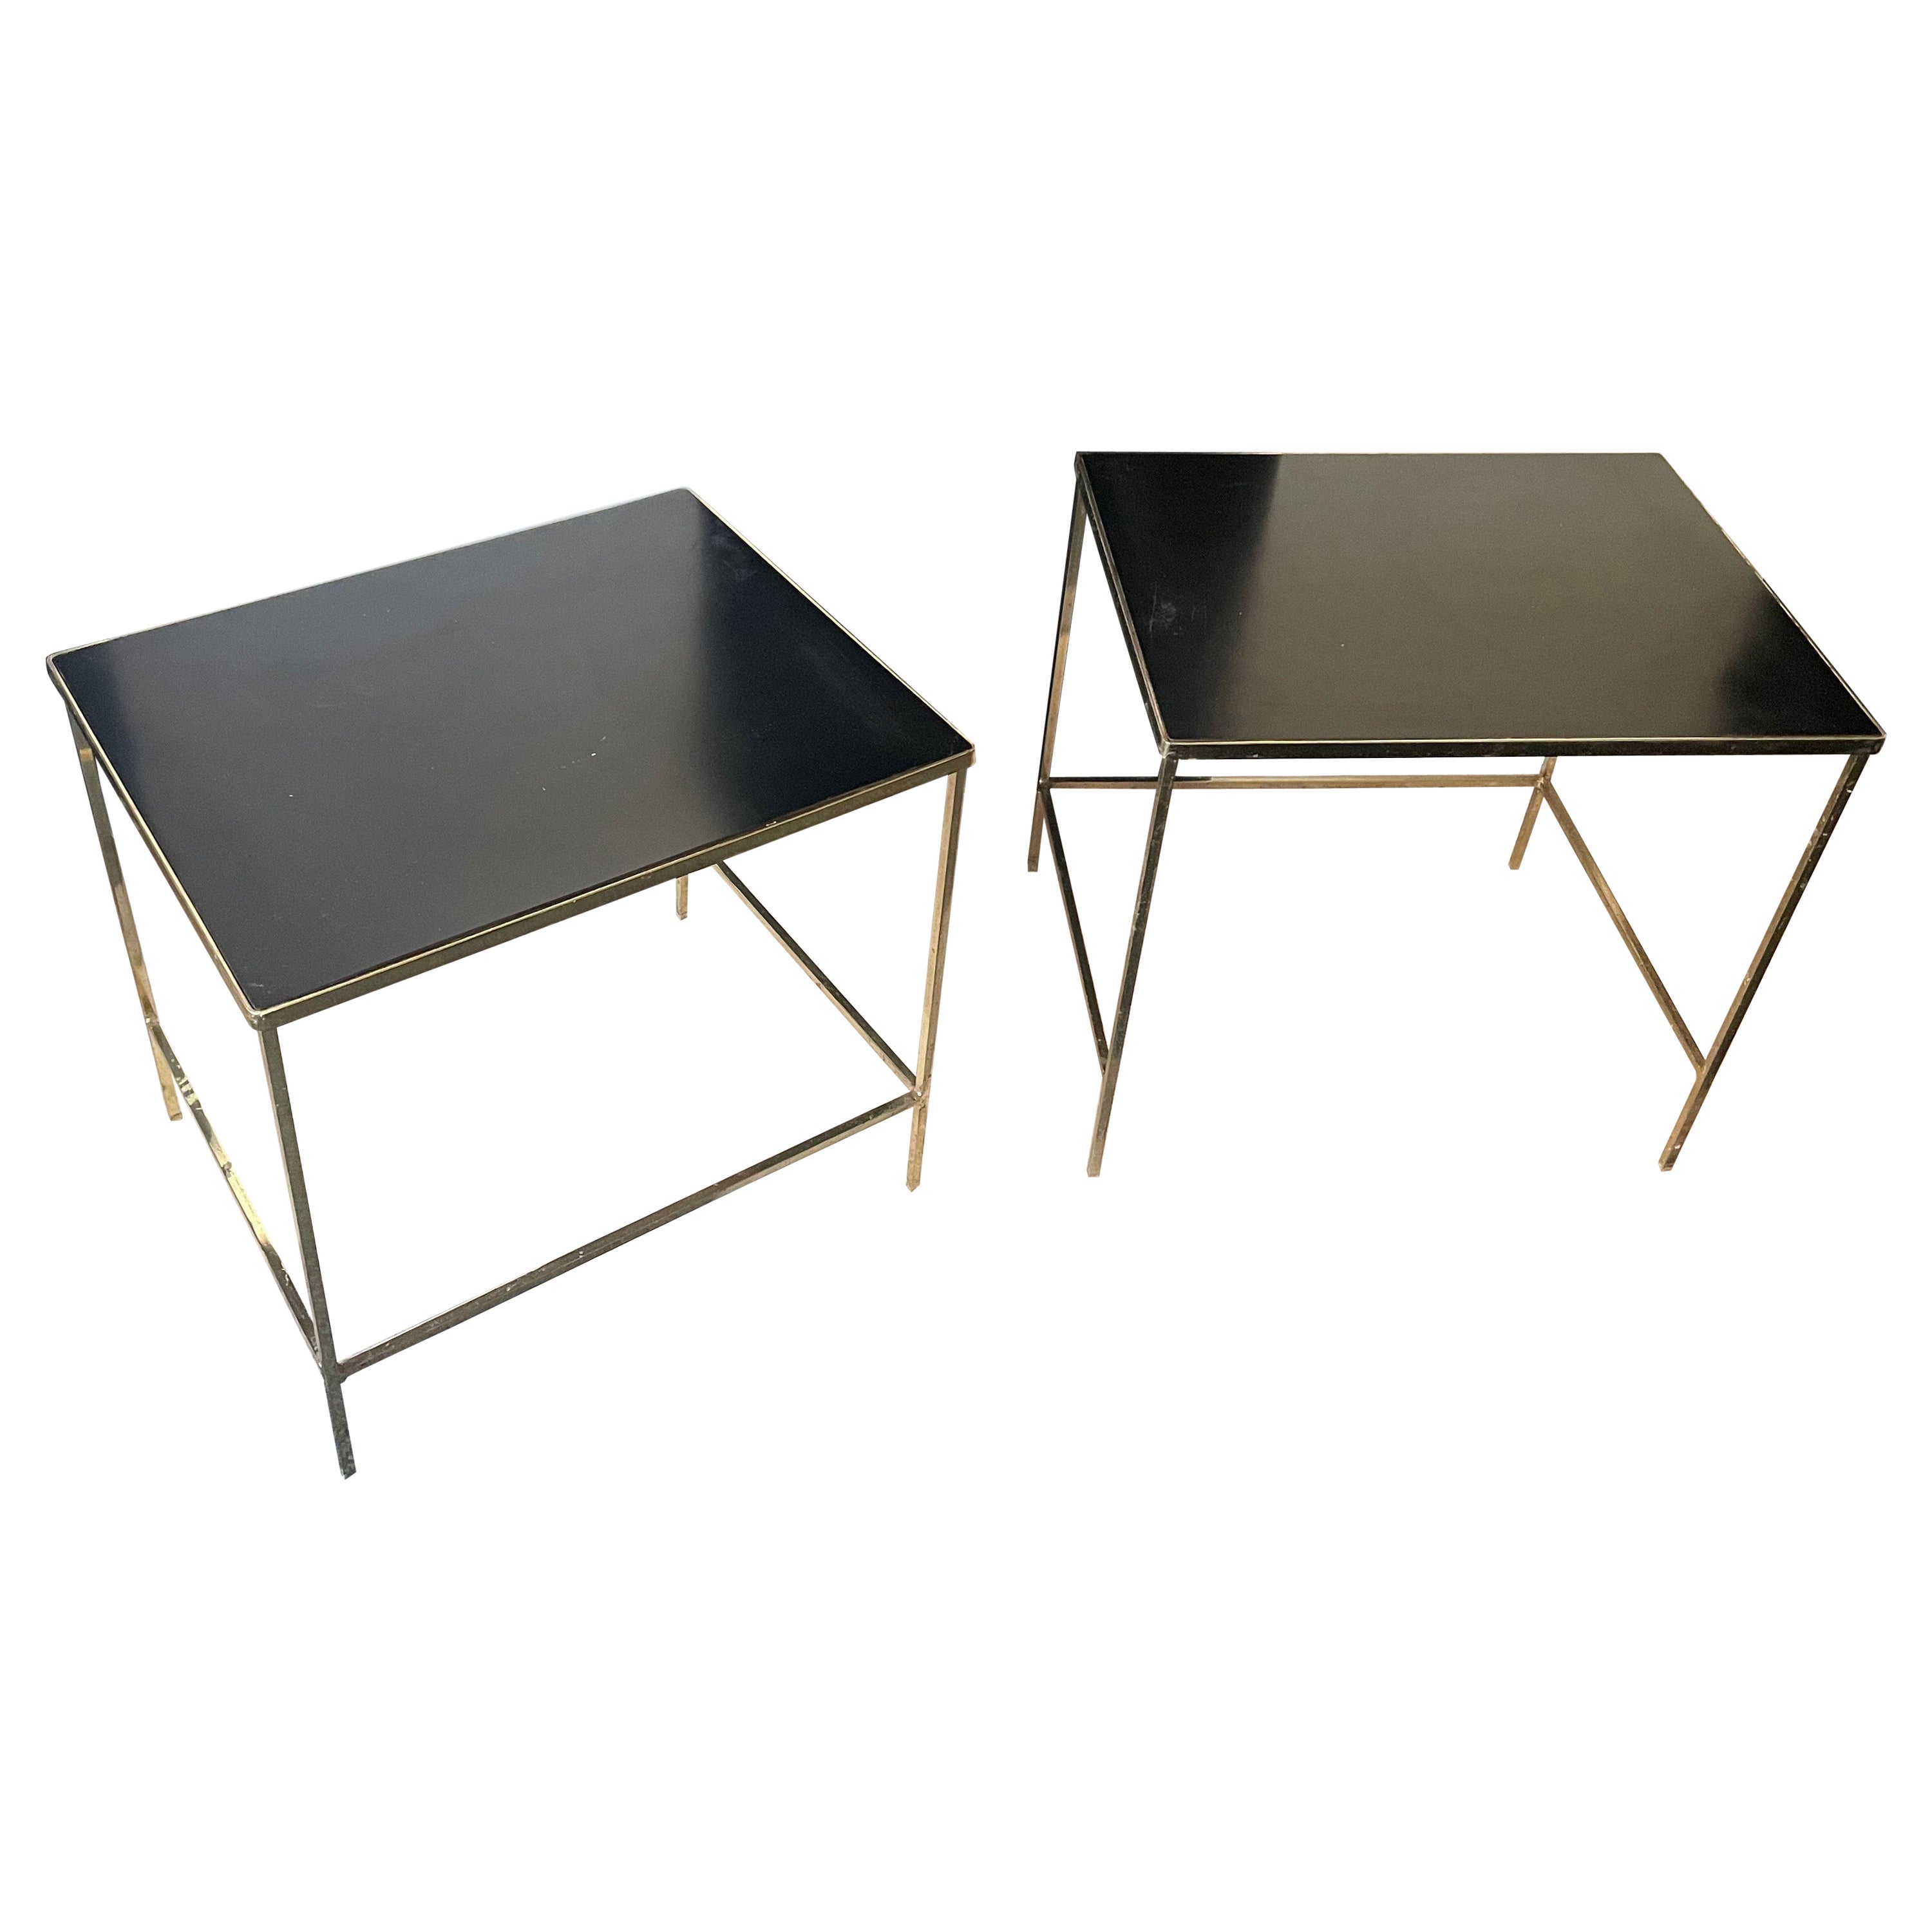 Pair of Minimalist Gilt Side Tables with Black Formica Tops, France, 1970